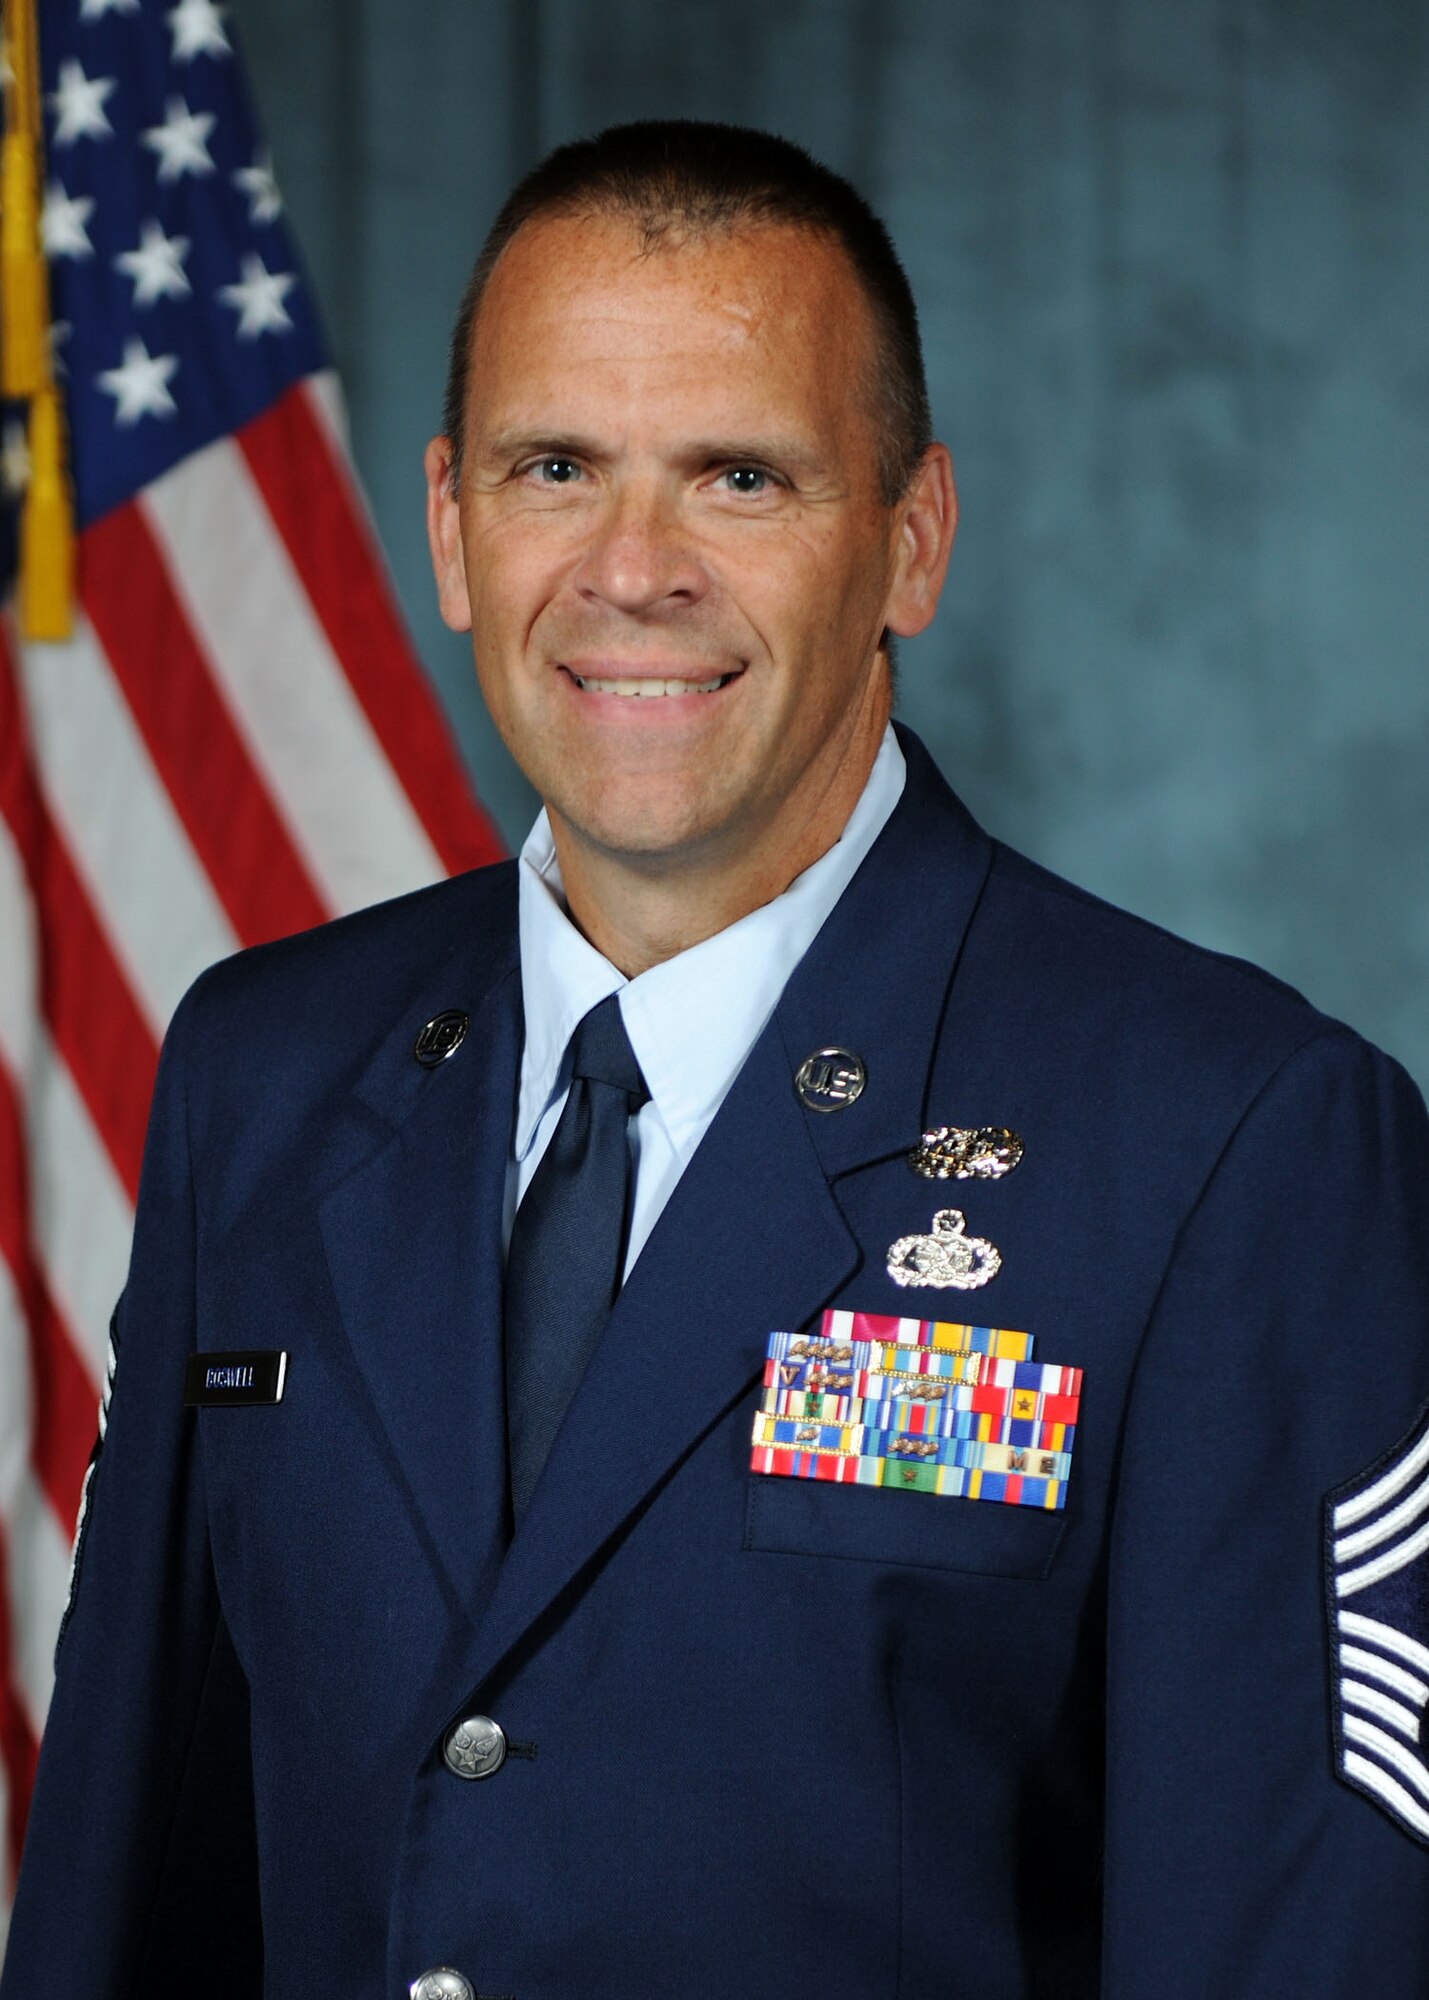 Official photo of New York Air National Guard Chief Master Sgt. James Boswell. (New York Air National Guard photo by Tech. Sgt. Jeremy M. Call/Released)